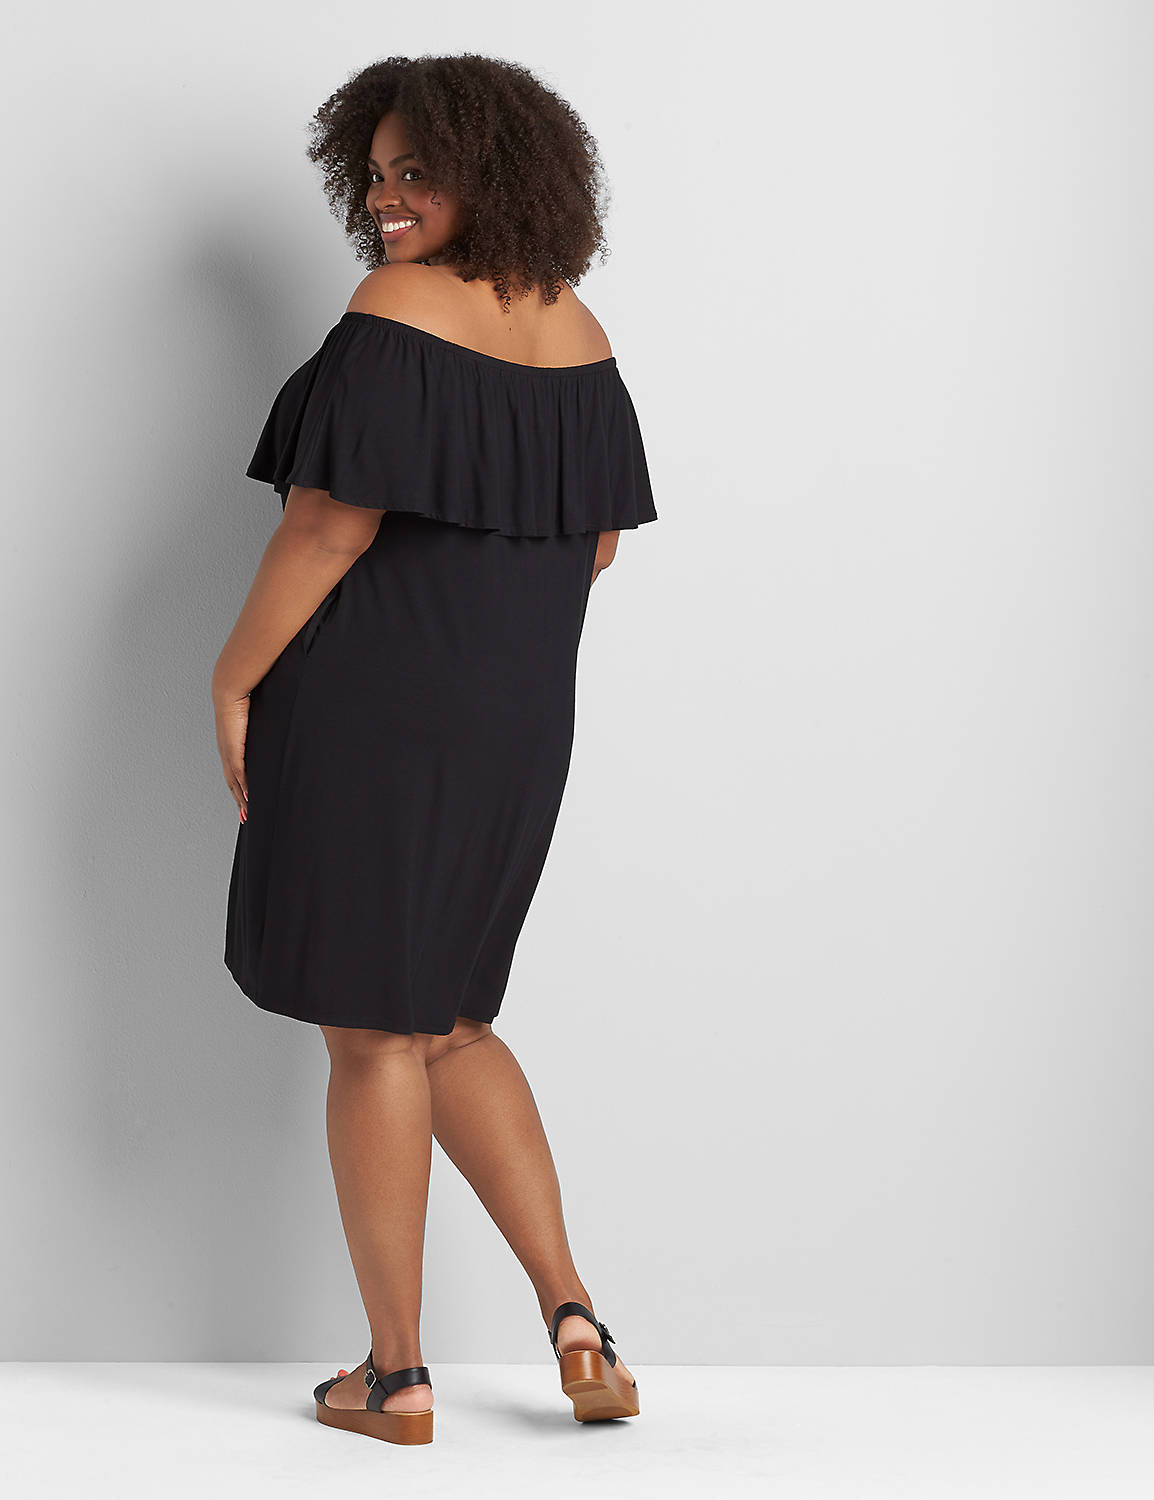 Convertible Off-The-Shoulder A-Line Dress Product Image 2